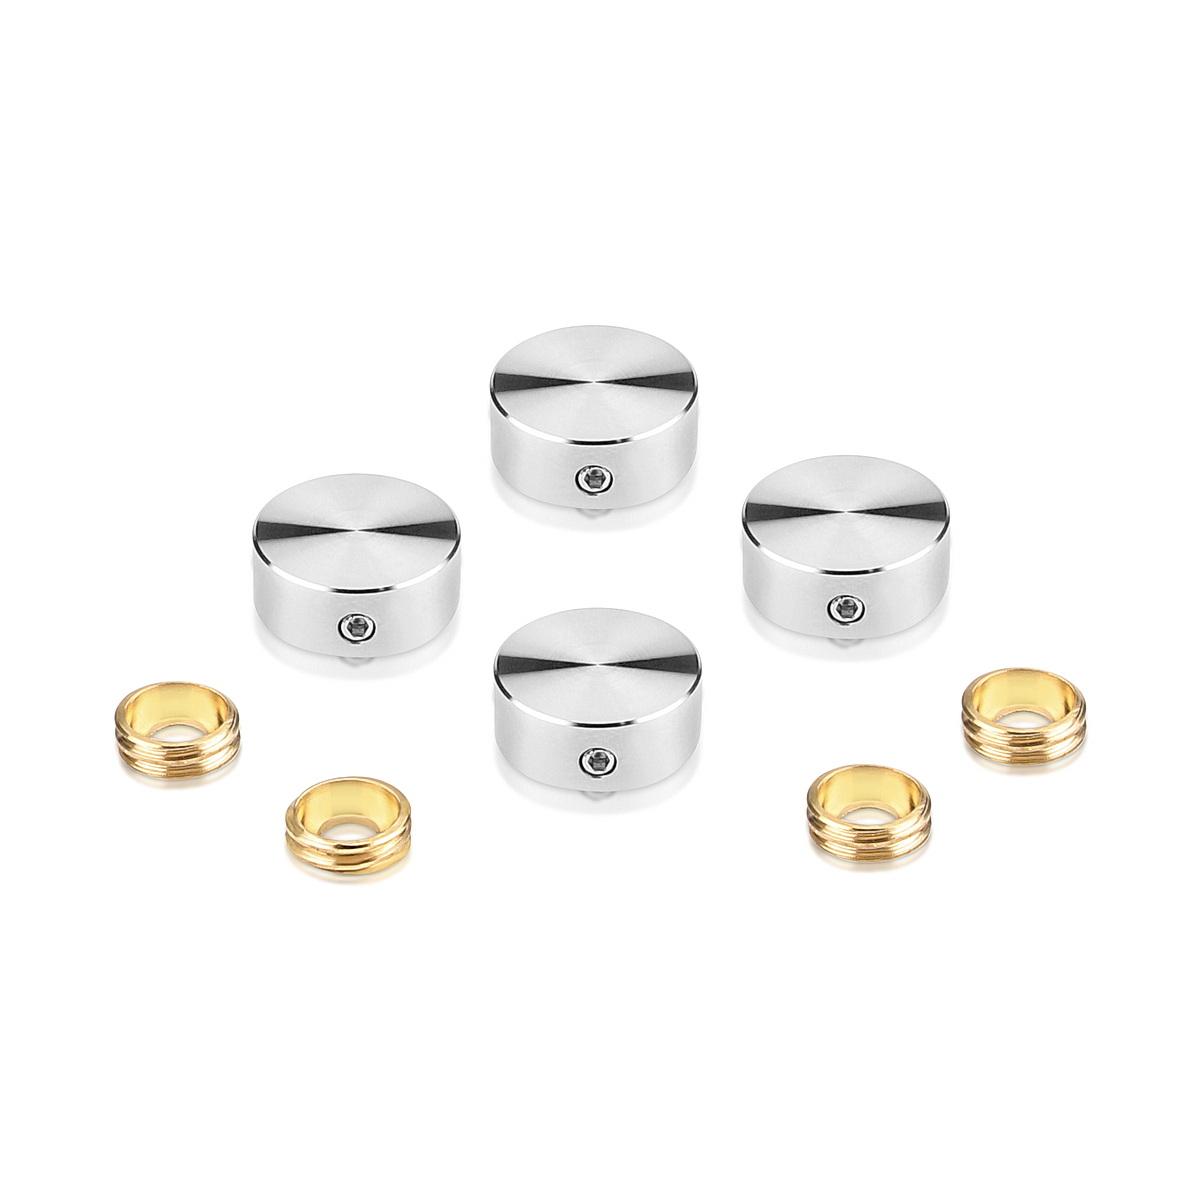 Set of 4 Locking Screw Cover Diameter 5/8'', Satin Brushed Stainless Steel Finish (Indoor or Outdoor)